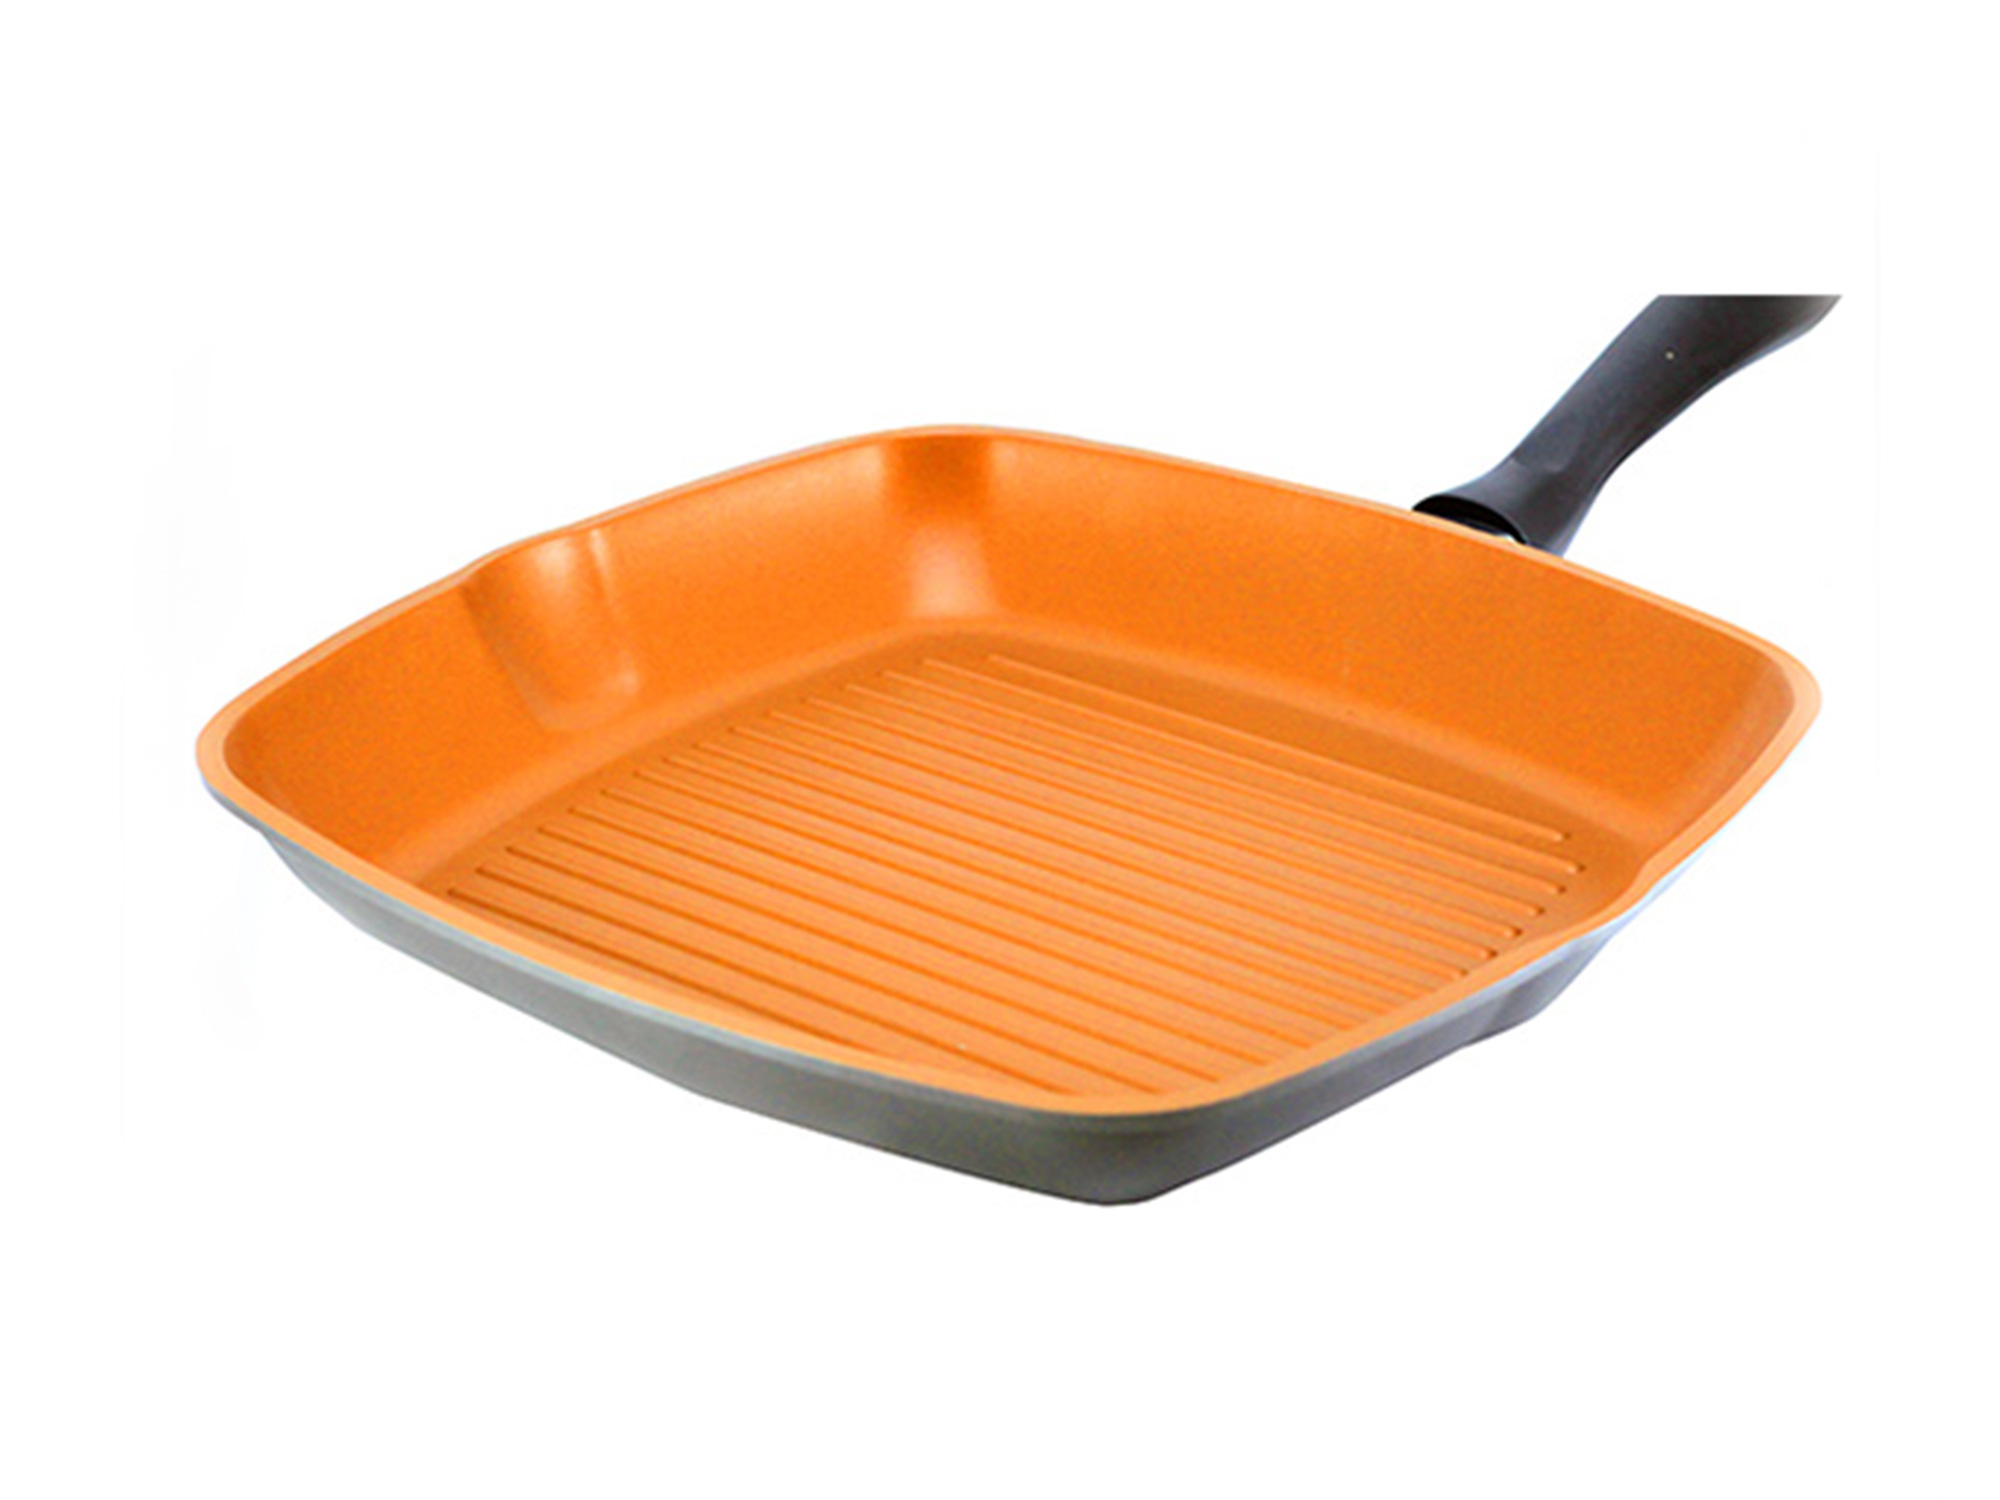 Concerns About PFOA Used in Nonstick Cookware